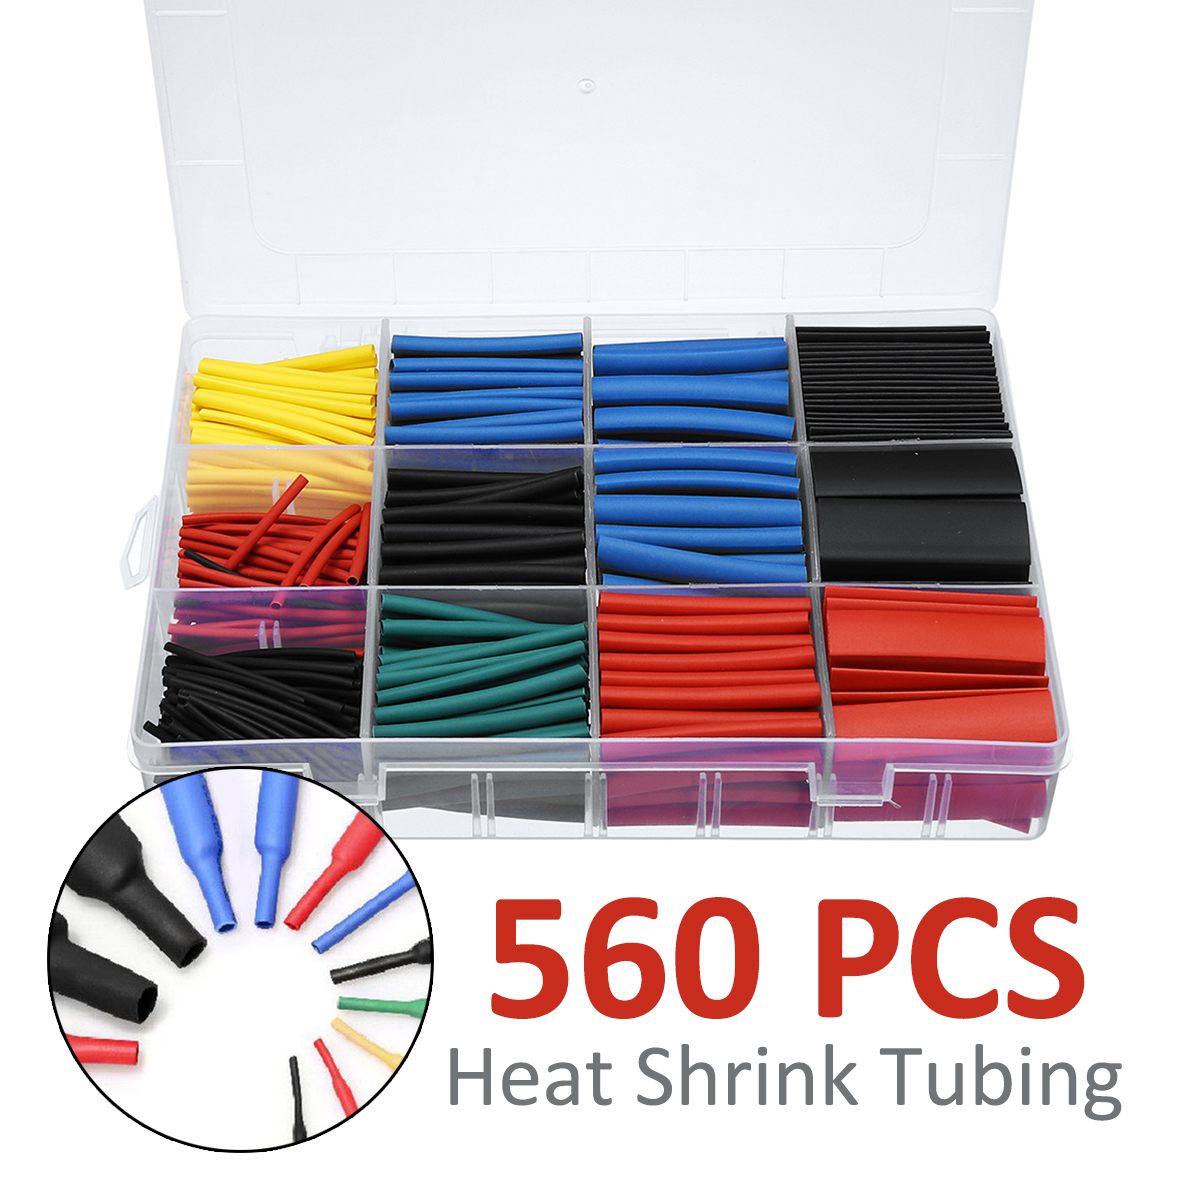 560Pcs-11-Sizes-Heat-Shrink-Tubing-Tube-Wire-Cable-Insulation-Sleeving-Kit-1365687-1